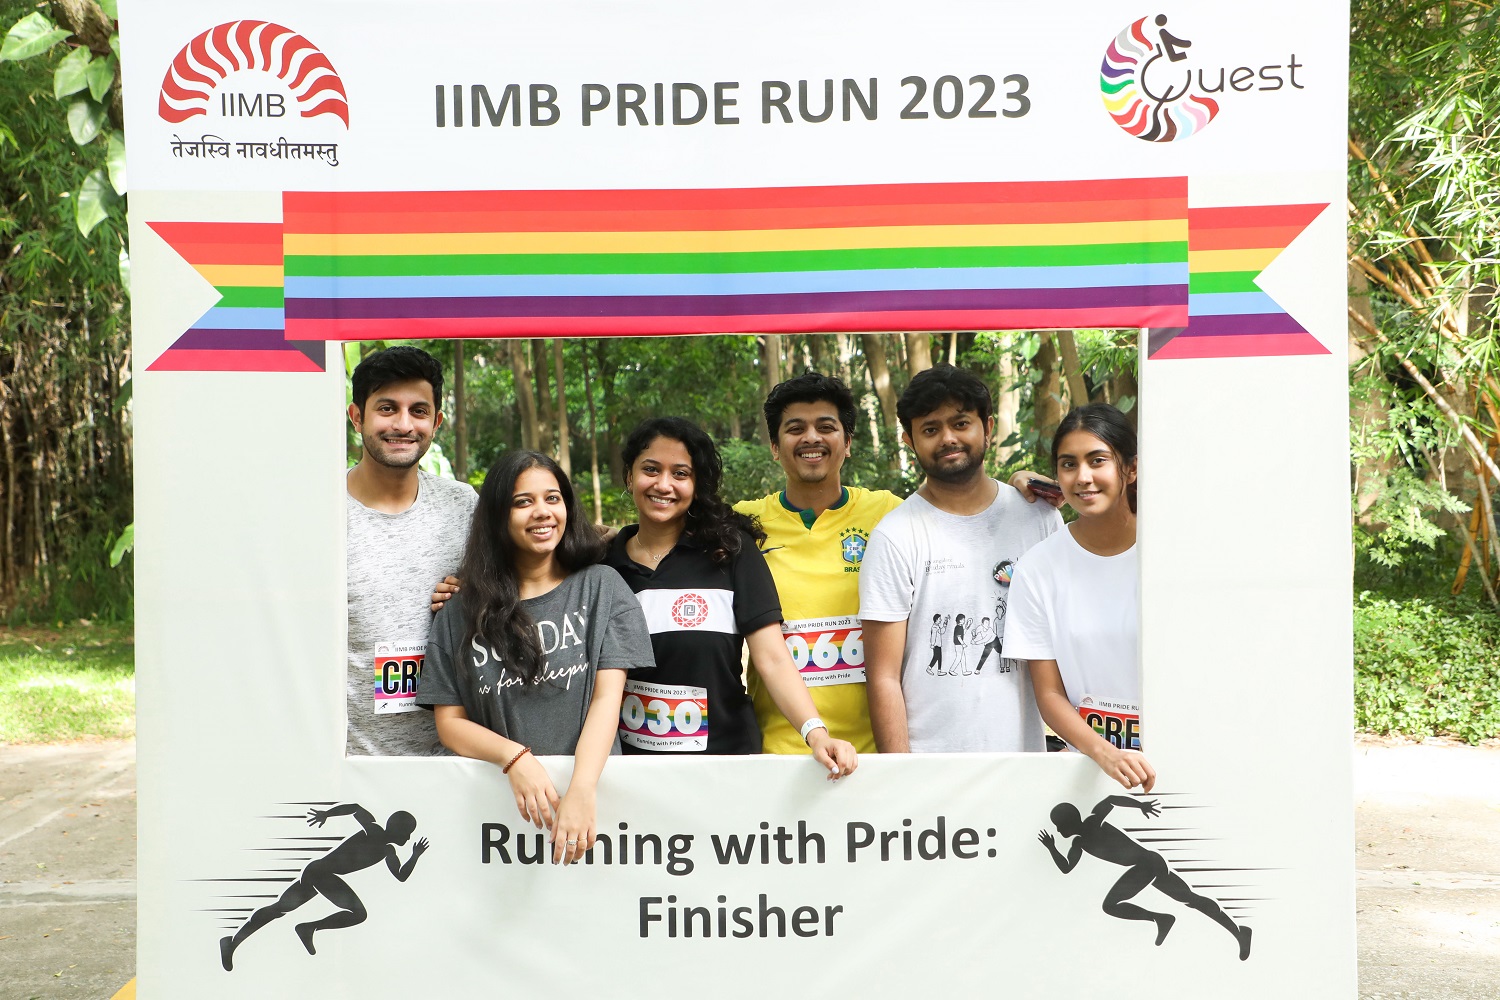 Students of IIMB hosted the Pride Run on 25th June 2023, to celebrate Pride Month.